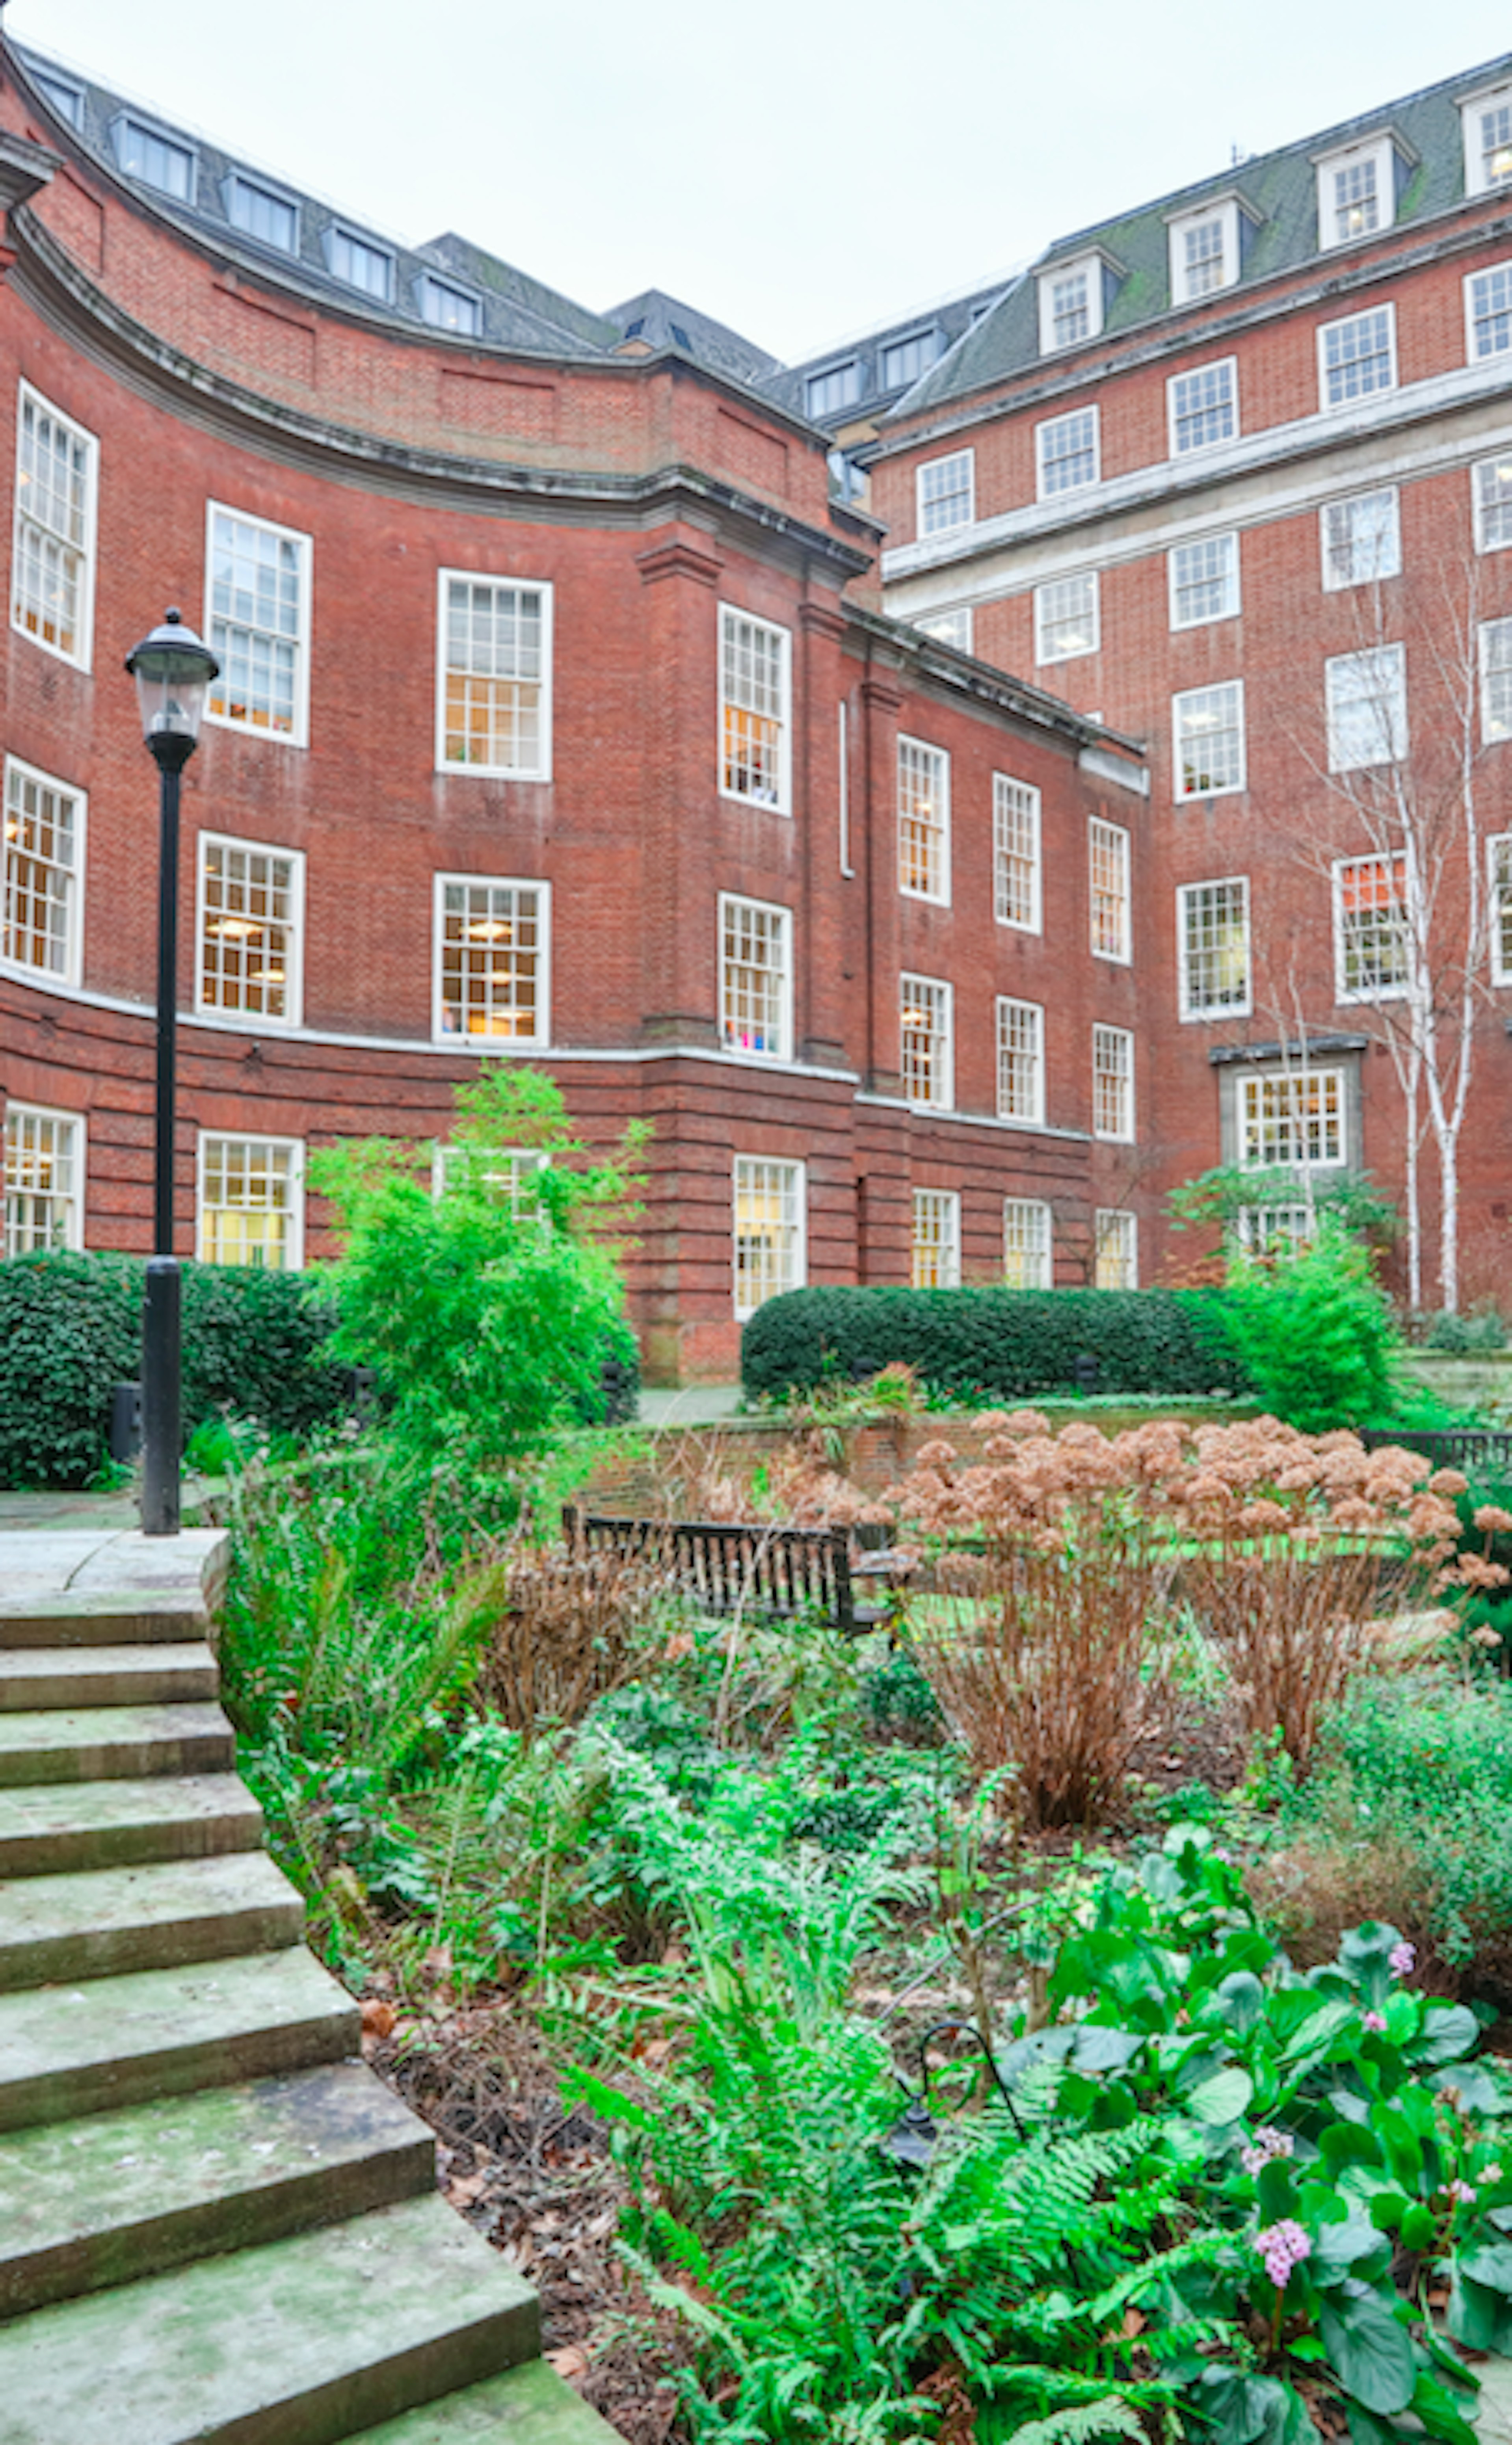 Summer Party Venues - BMA House